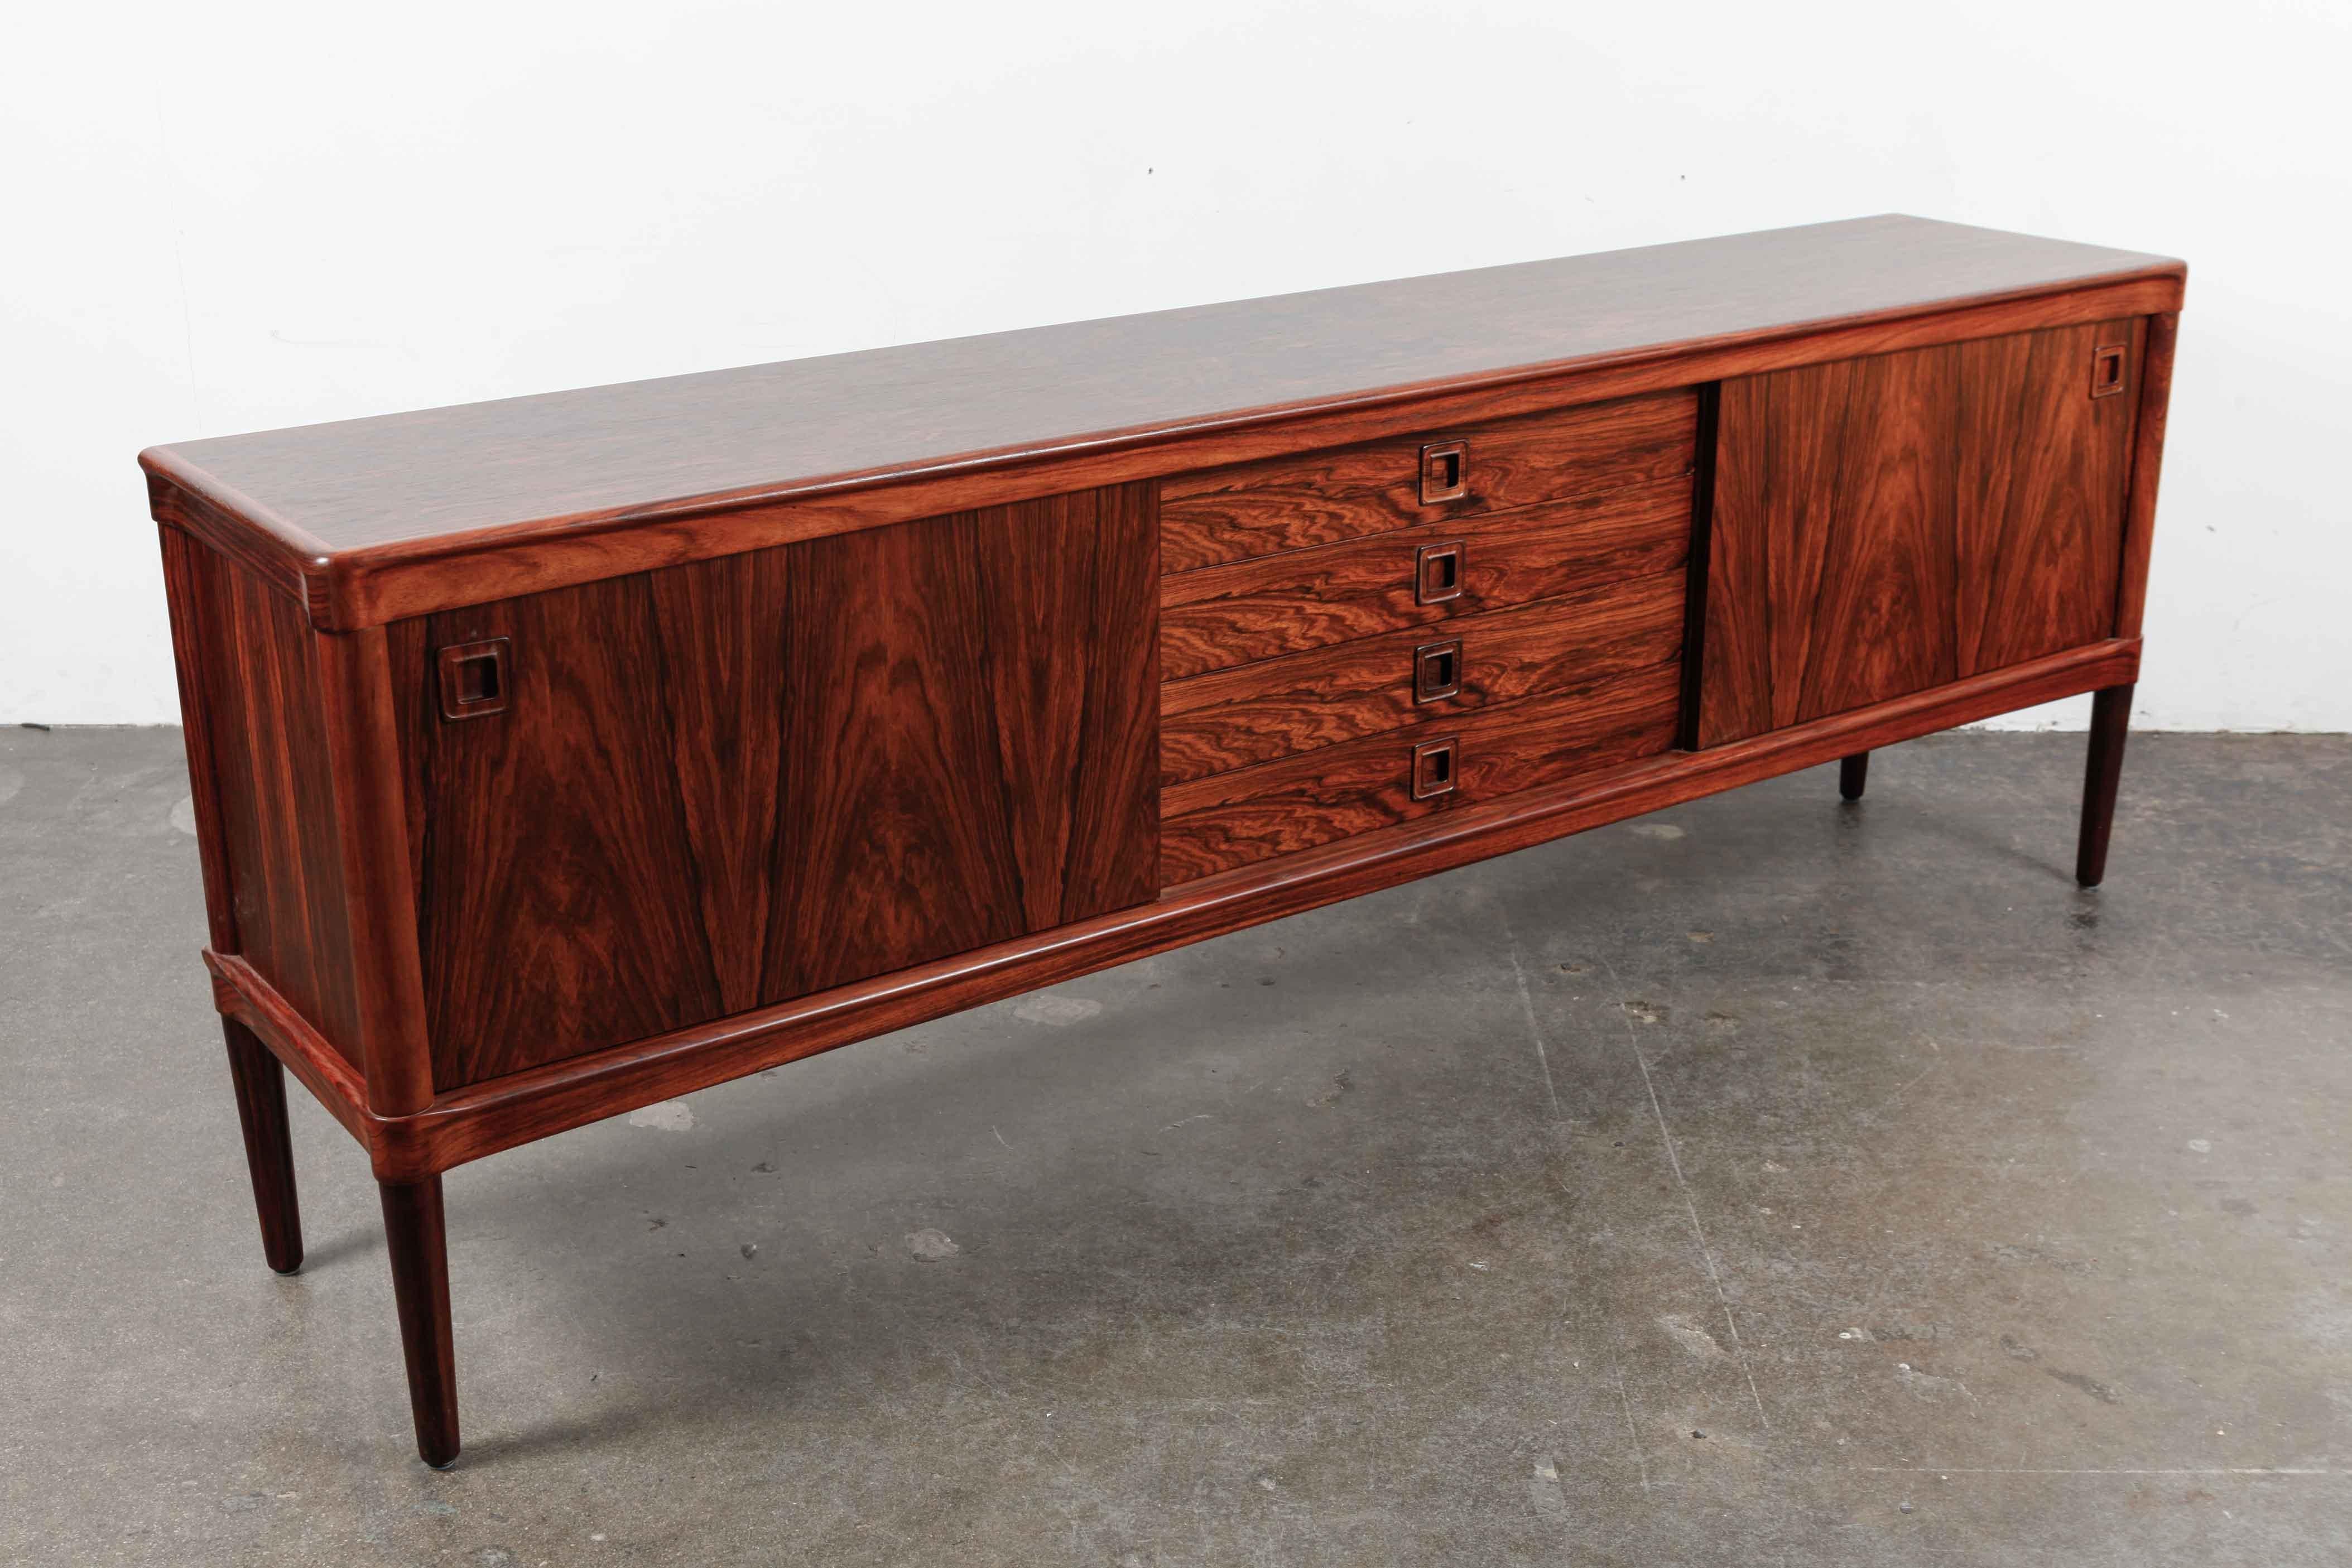 Stunning rare, low and long sideboard by H.W. Klein for Bramin Mobler, Denmark. It has incredible grain throughout and beautiful craftsmanship and details. This sideboard has been newly refinished in a satin lacquer. 

 